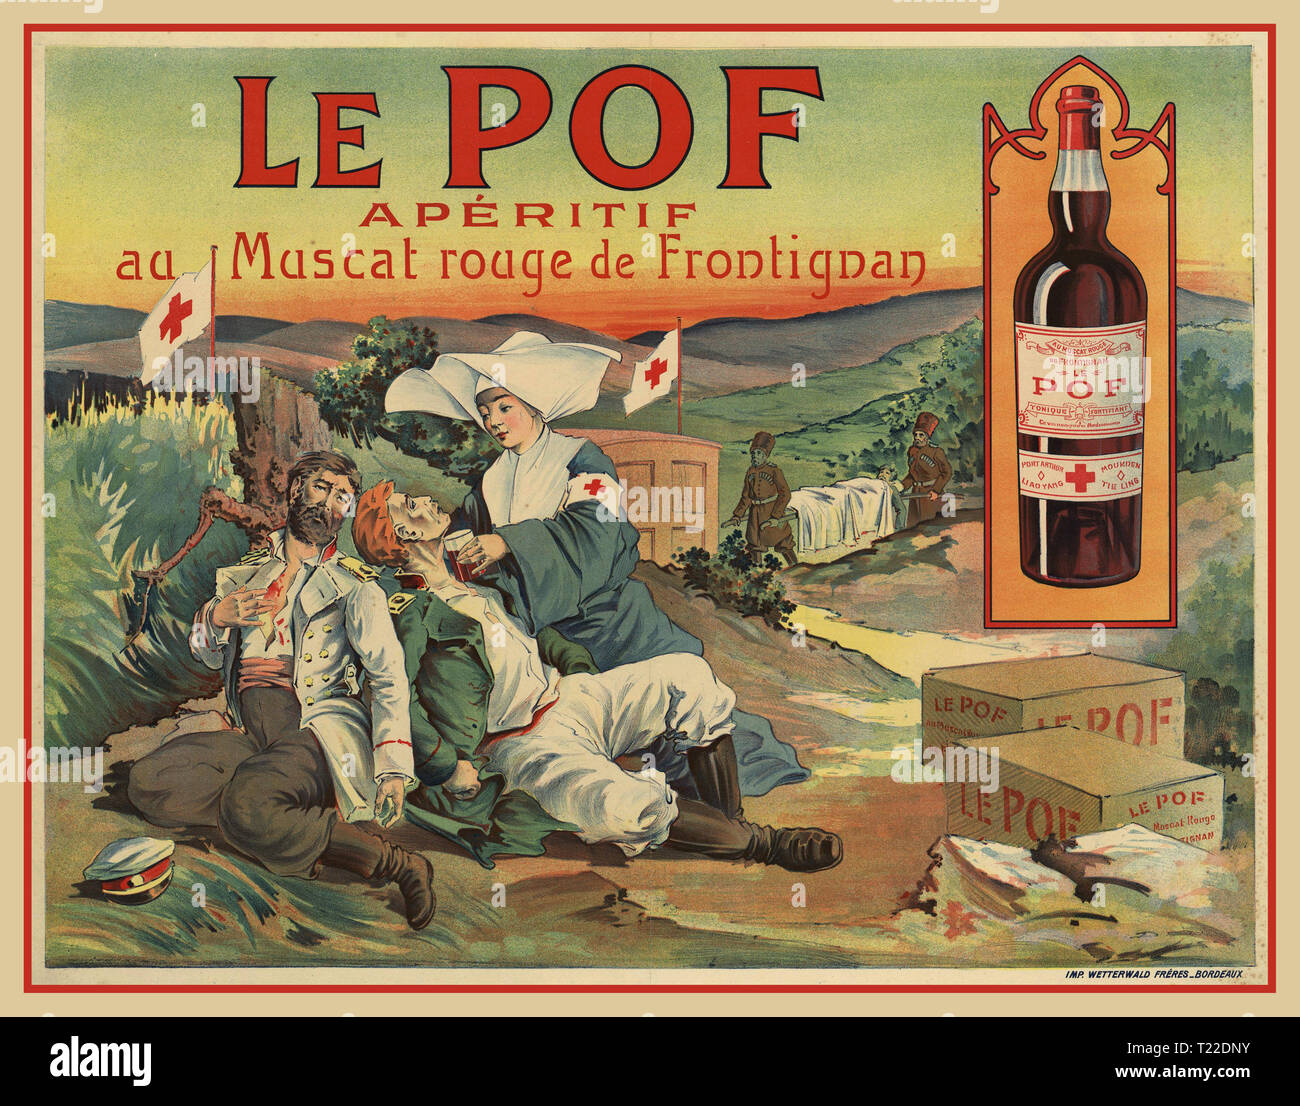 Vintage 1900's French Alcohol Poster Le POF, apéritif au Muscat rouge de Frontignan : affiche publicitaire. turn of the 19/20th century advertising illustrating Red Cross nurse giving a glass of recuperative healing  'LE POF' muscat rouge to wounded soldiers Stock Photo